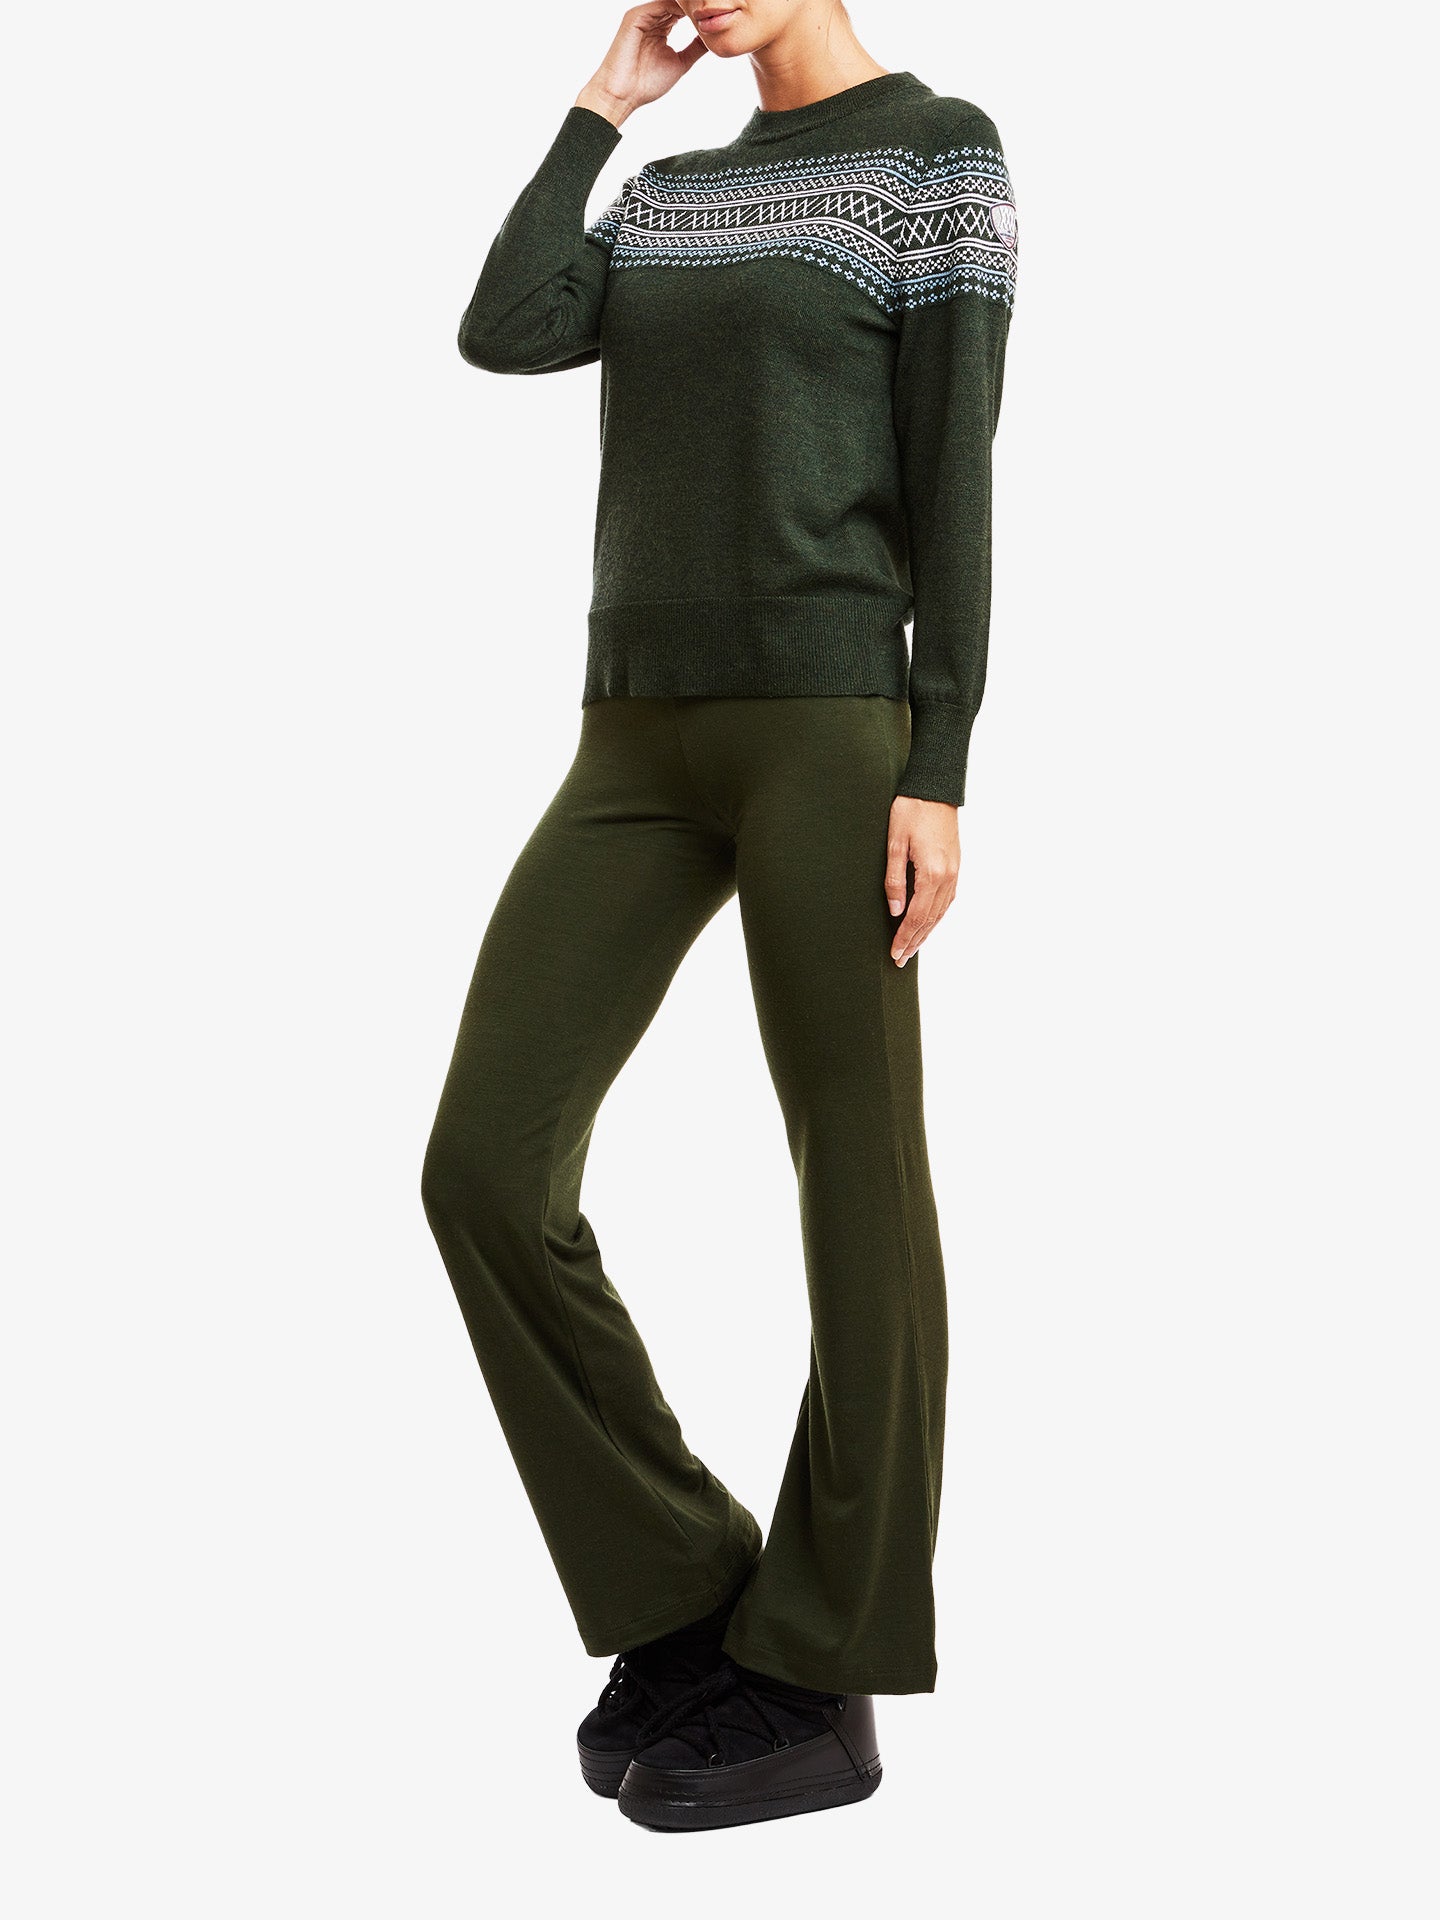 Hygge Flared Pant Women Olive Green